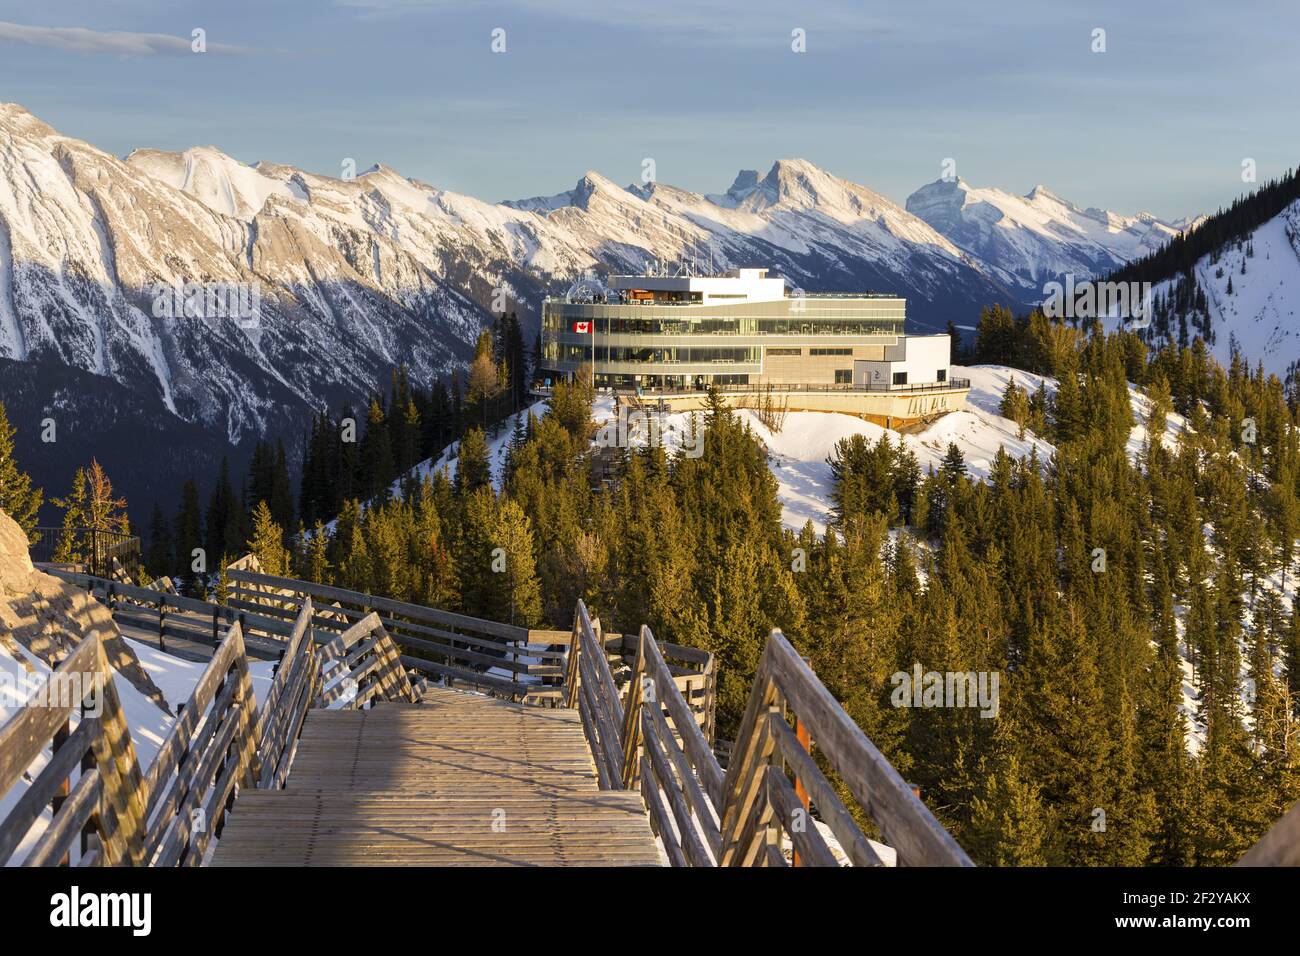 Sulphur Mountain Boardwalk and Gondola Station Upper Terminal above City of Banff, Alberta. Scenic Winter Landscape Panorama high in Canadian Rockies Stock Photo